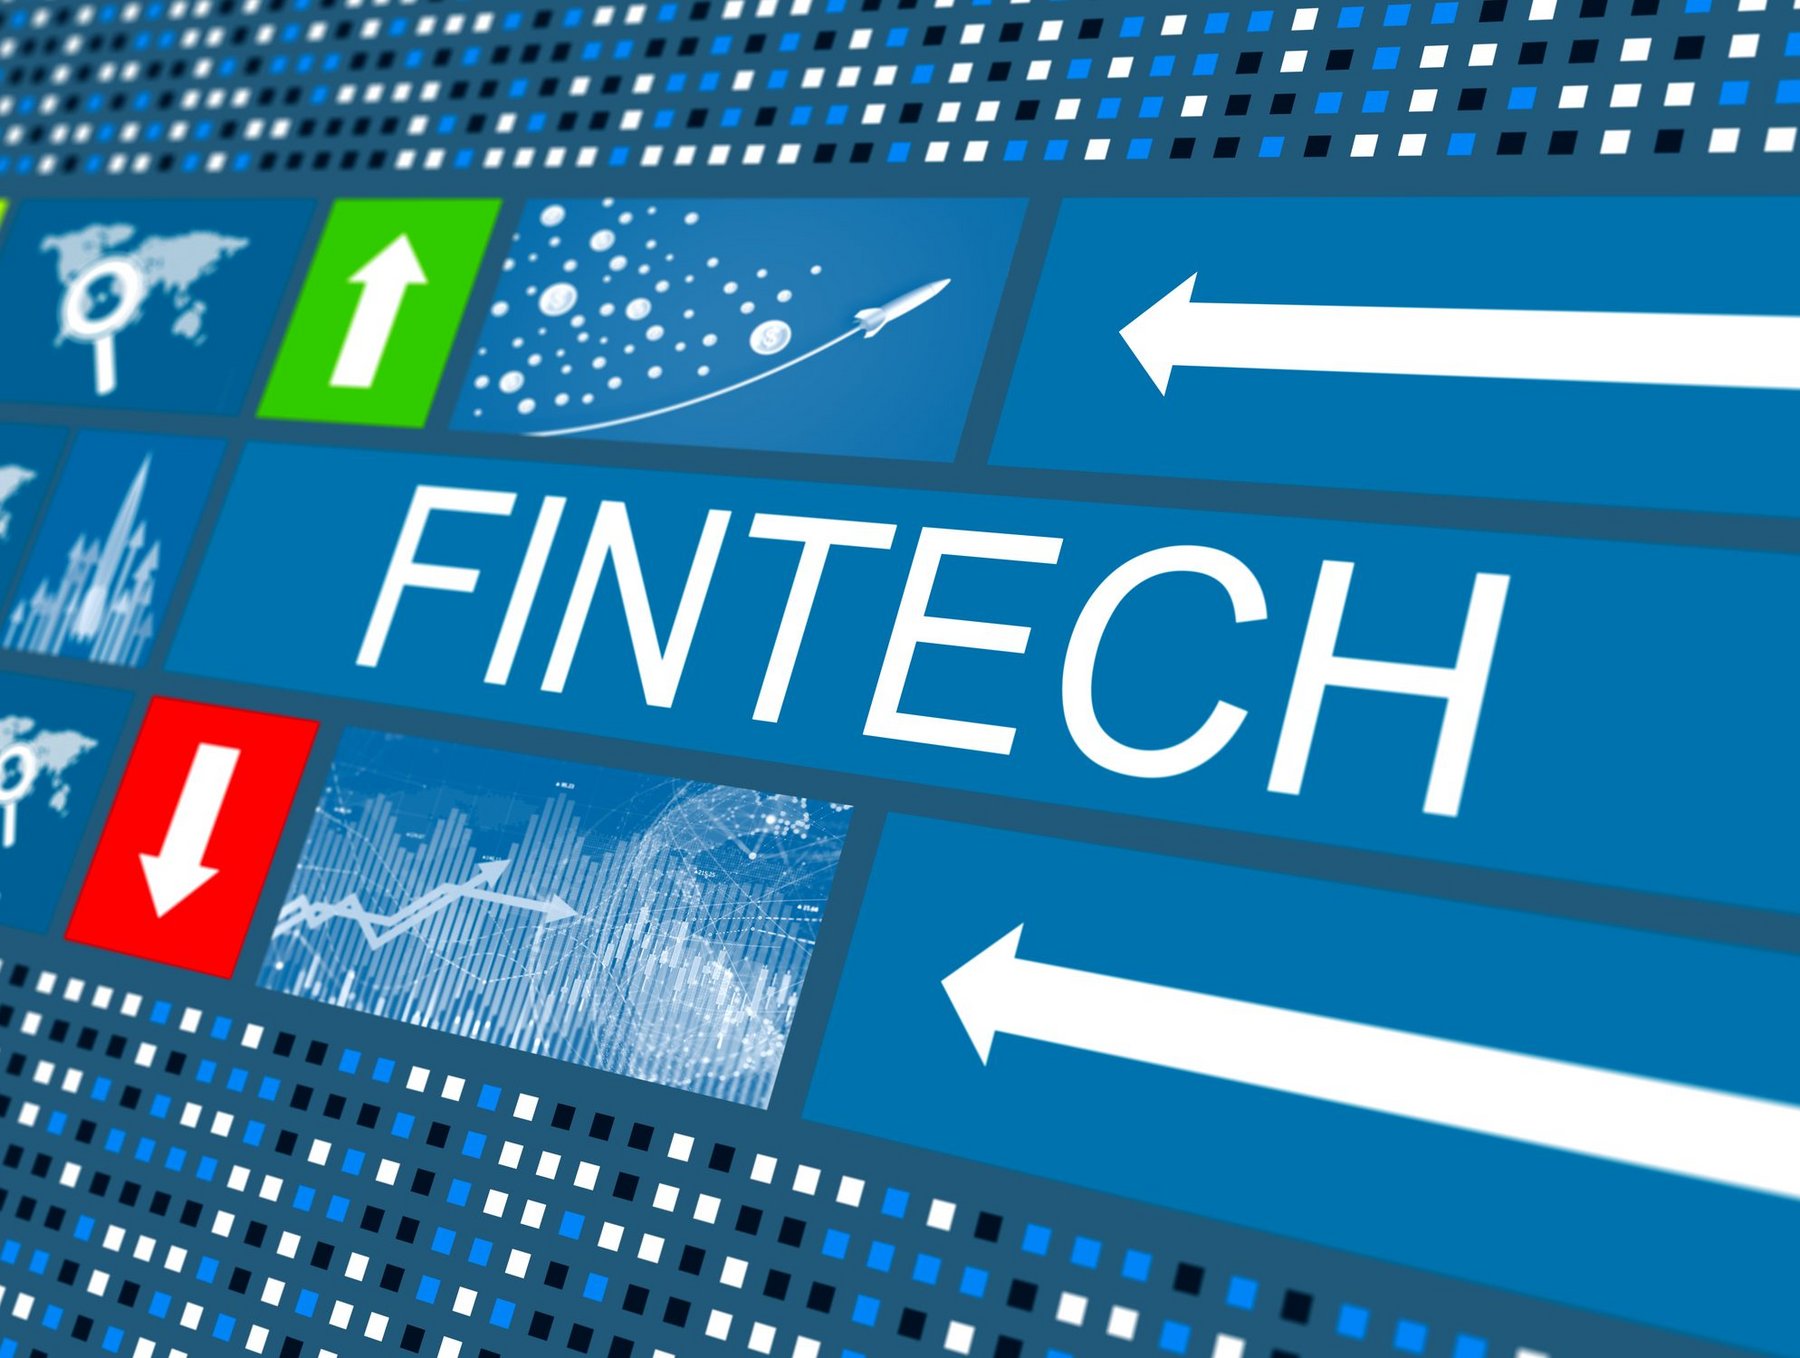 Image of the text "Fintech"